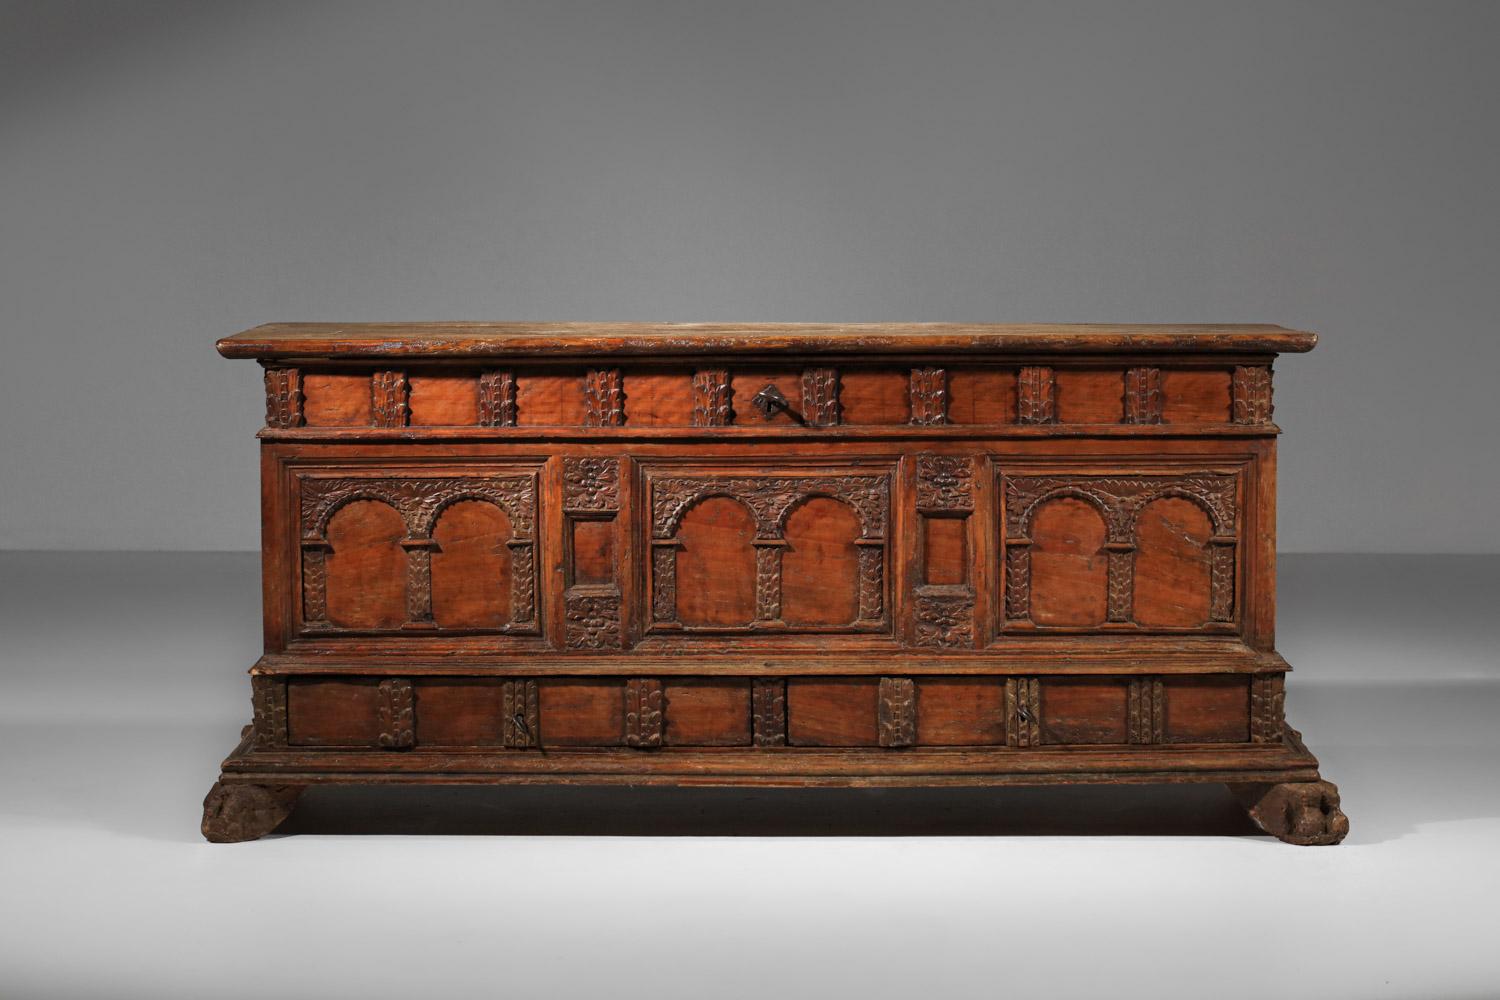 Spanish or Italian 17th century bis chest. 
Chest structure in solid walnut, entirely hand-carved. Exceptional craftsmanship. 
Very naive vintage conduction with a nice patina on the wood (photos). The whole trunk is marked by the passage of time